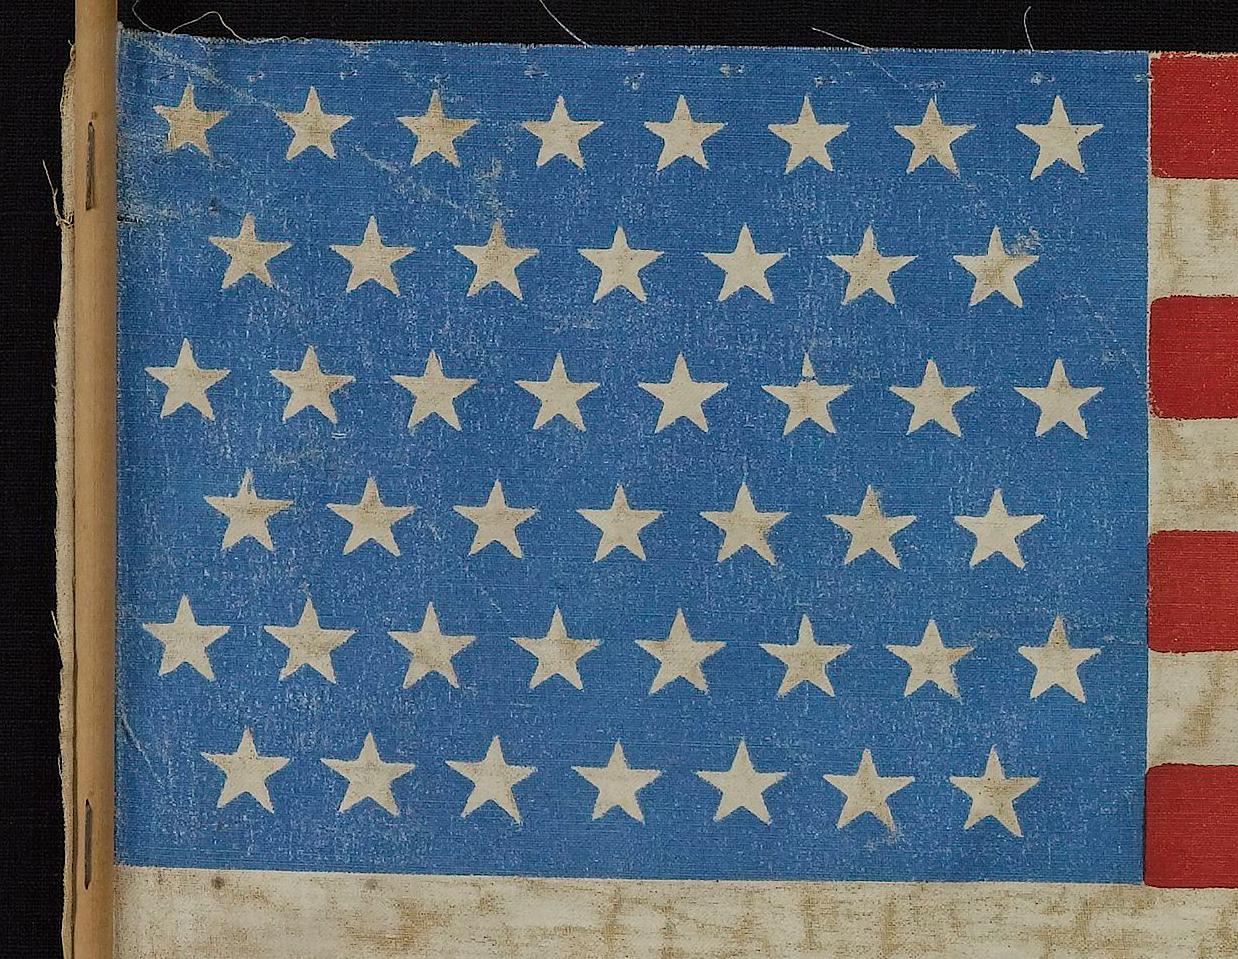 This 45-star United States flag celebrates the statehood of Utah. 45-star flags served as the official American flag from 1896-1908. This particular flag was flown as a parade flag, with part of its original stick still attached along the hoist. The